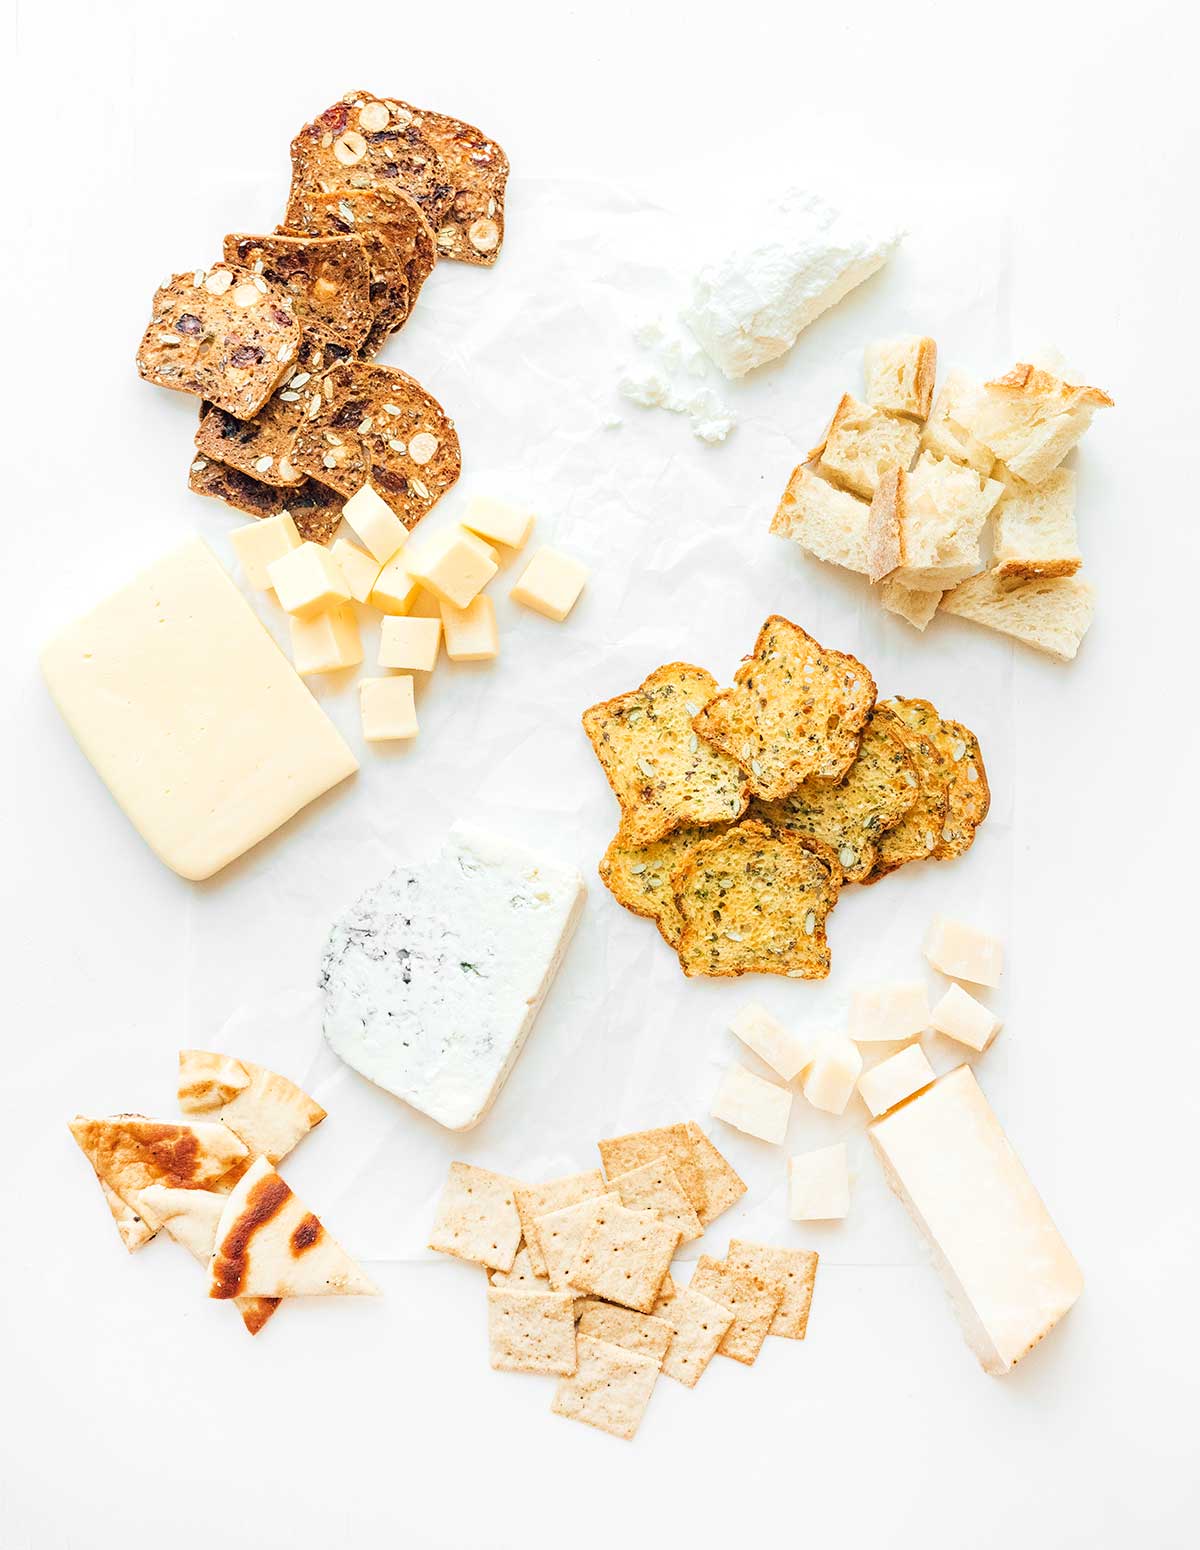 The start to a cheese board with 4 types of crackers and bread pieces spread out in neat groups with four types of cheese placed in between